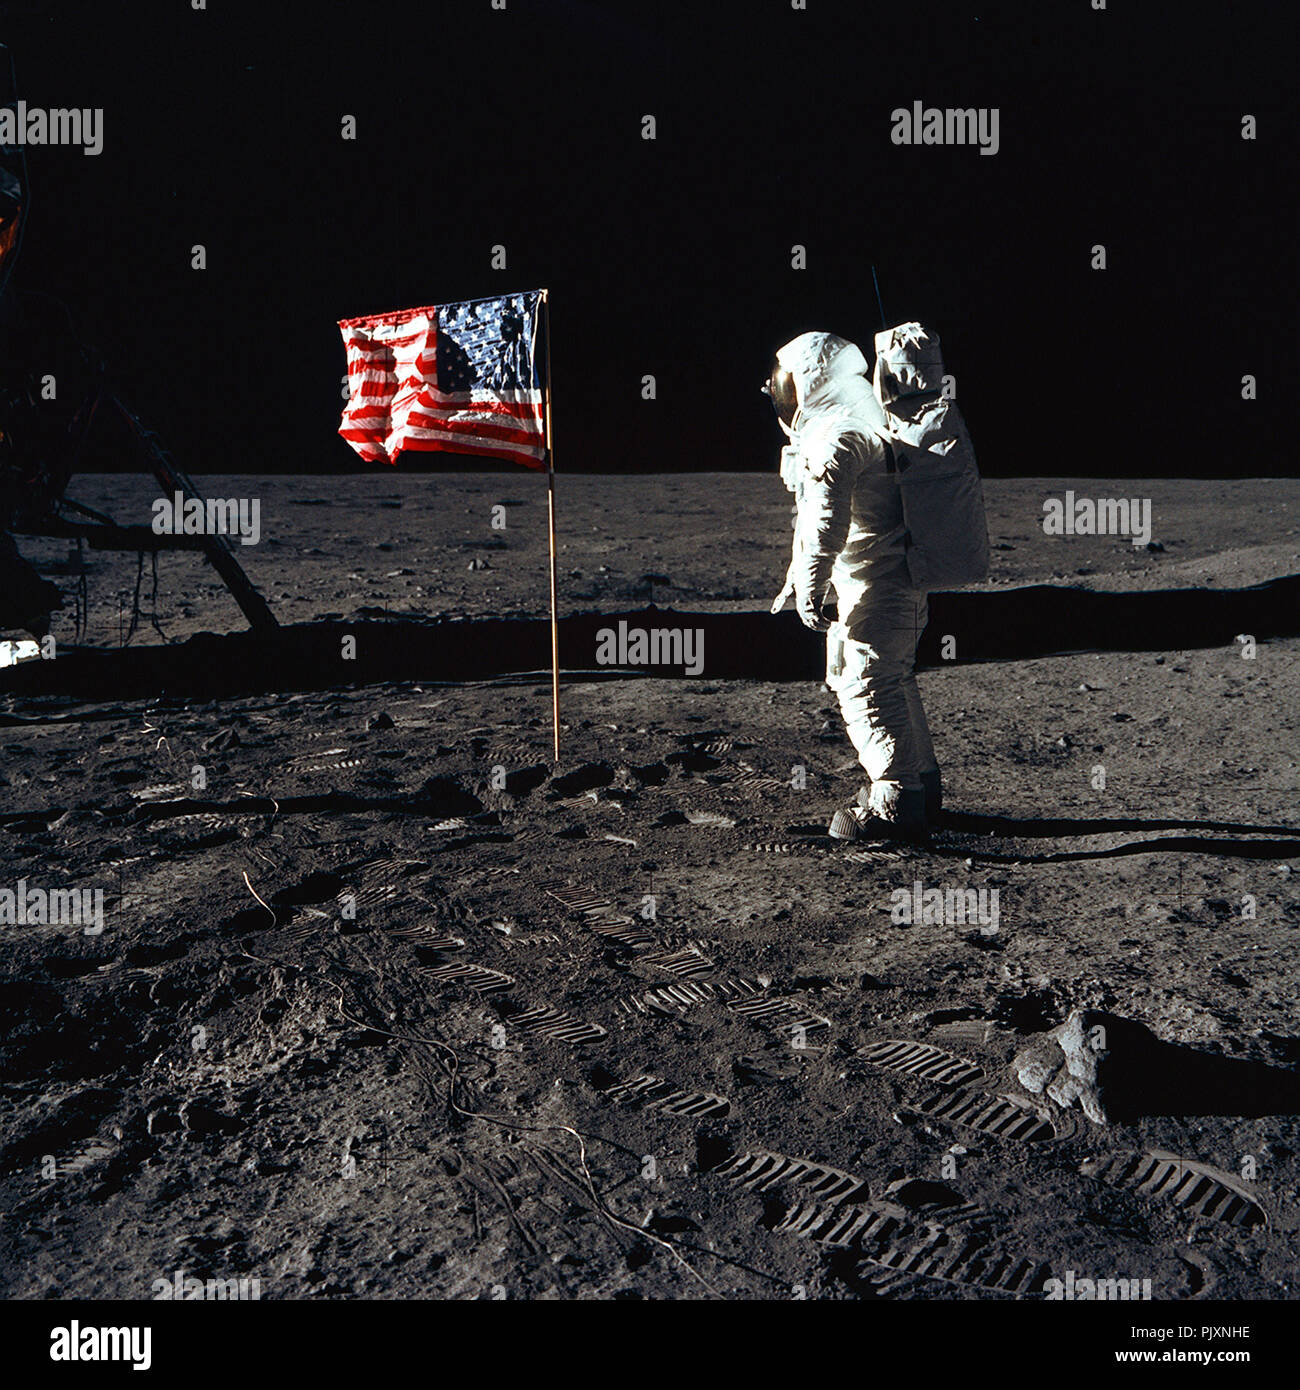 The Moon - (FILE) -- Astronaut Buzz Aldrin, lunar module pilot of the first lunar landing mission, poses for a photograph beside the deployed United States flag during an Apollo 11 Extravehicular Activity (EVA) on the lunar surface on Sunday, July 20, 1969. The Lunar Module (LM) is on the left, and the footprints of the astronauts are clearly visible in the soil of the Moon. Astronaut Neil A. Armstrong, commander, took this picture with a 70mm Hasselblad lunar surface camera. While astronauts Armstrong and Aldrin descended in the LM, the 'Eagle', to explore the Sea of Tranquility region of the Stock Photo